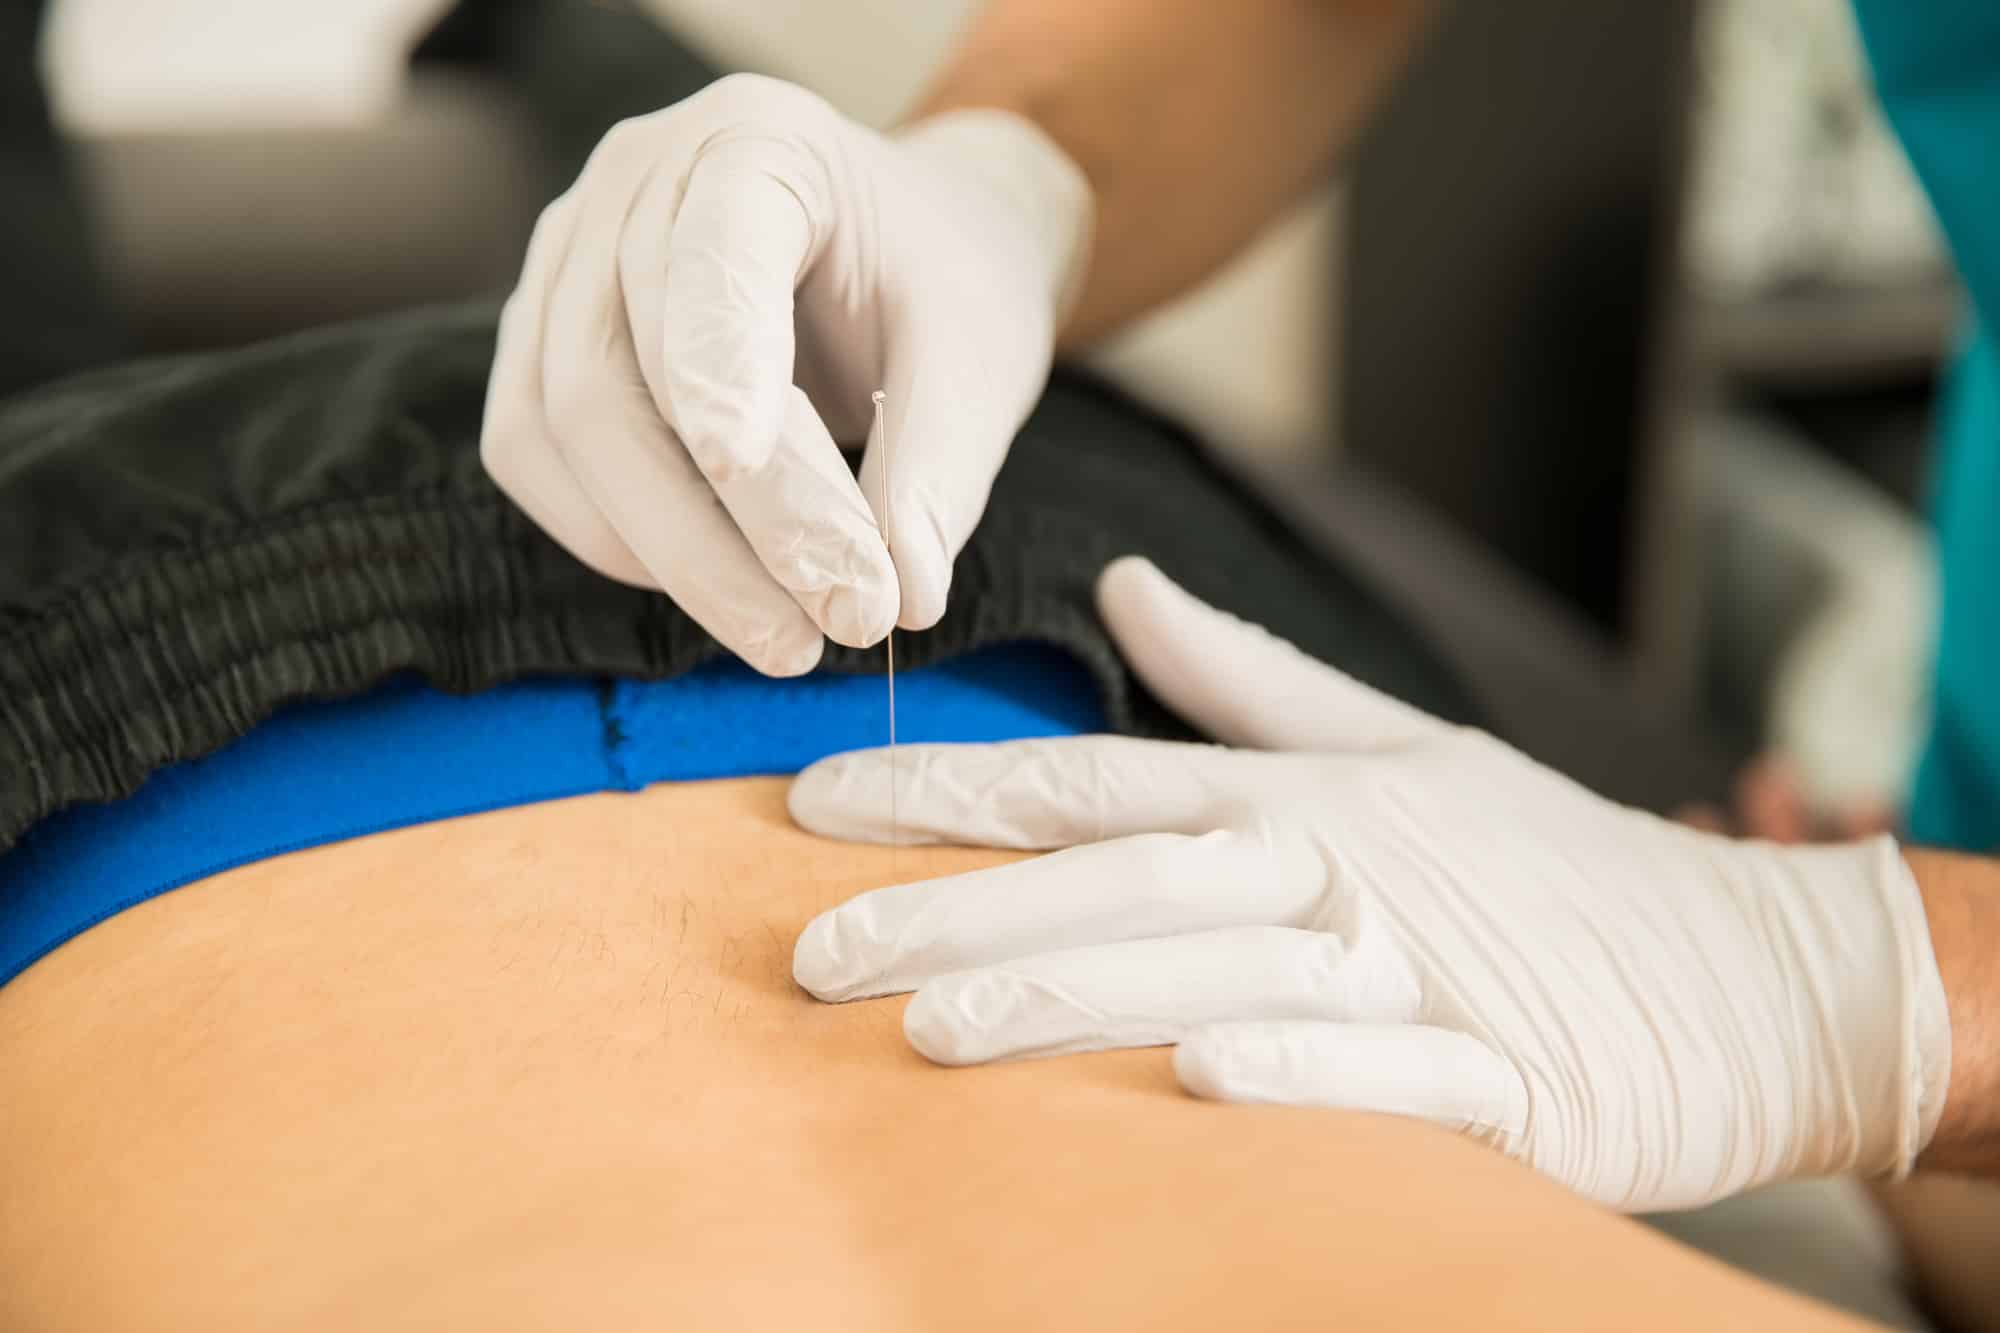 Dry Needling Physical Therapy Treatments Capitol Physical Therapy Physical Therapists In